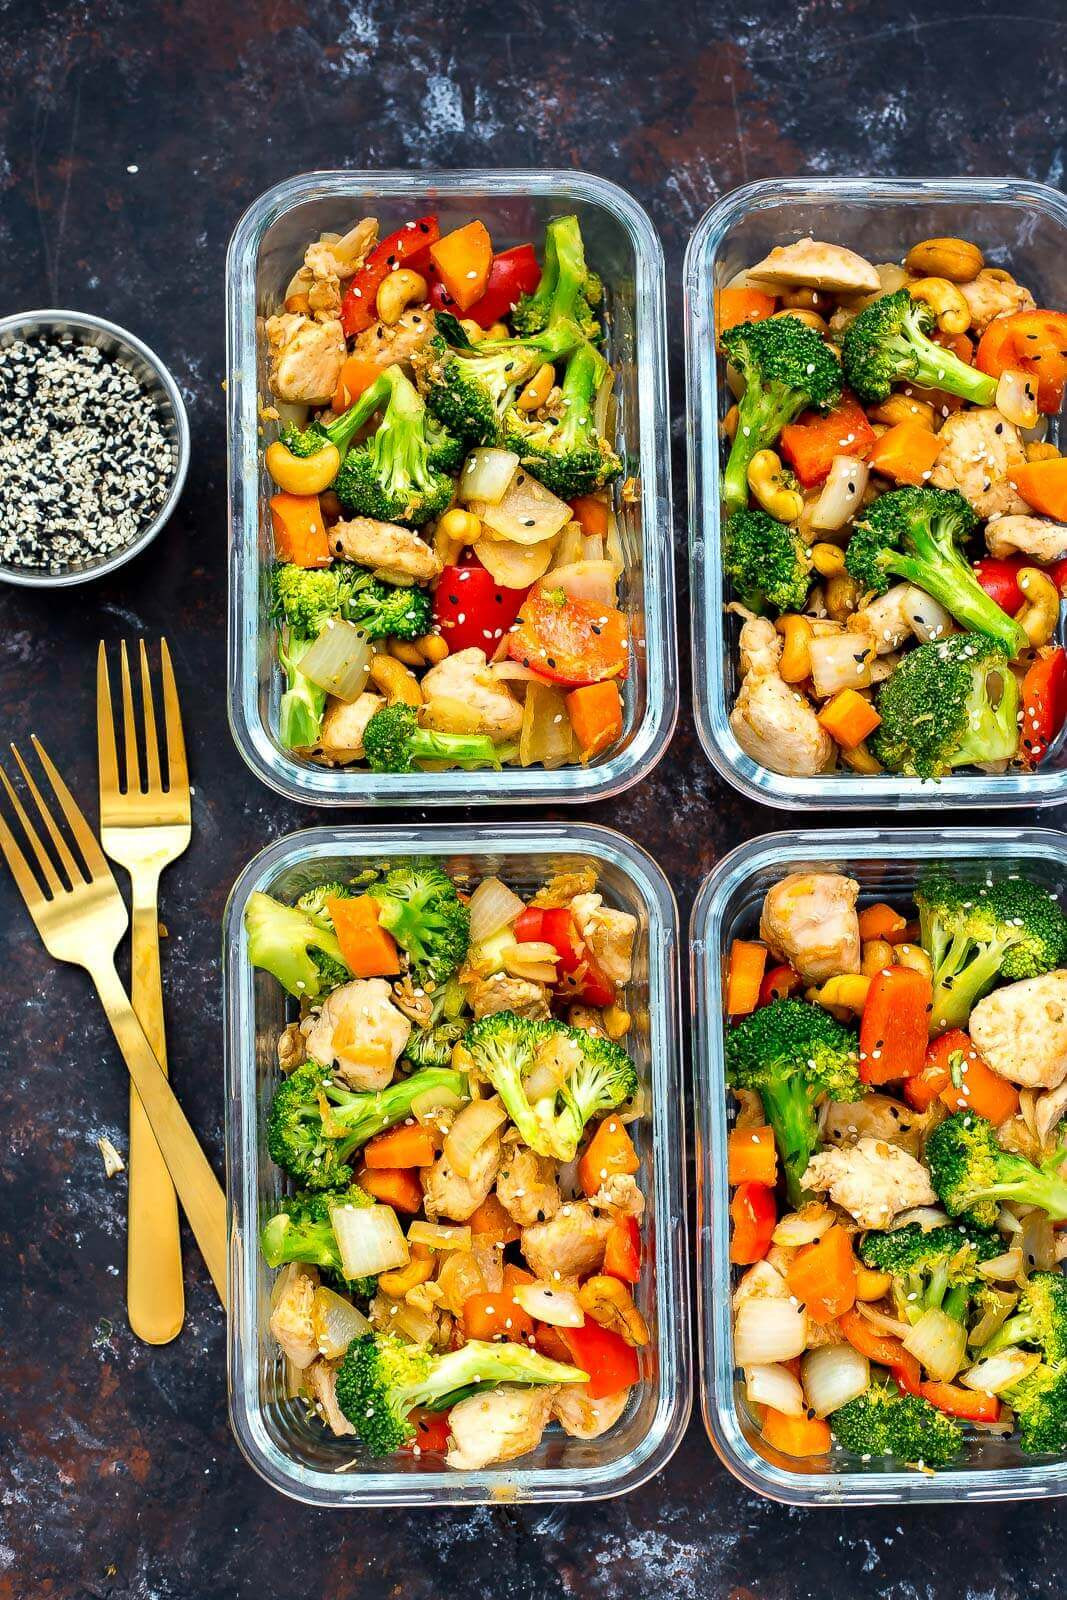 Recipes For Healthy Lunches
 20 Easy Healthy Meal Prep Lunch Ideas for Work The Girl